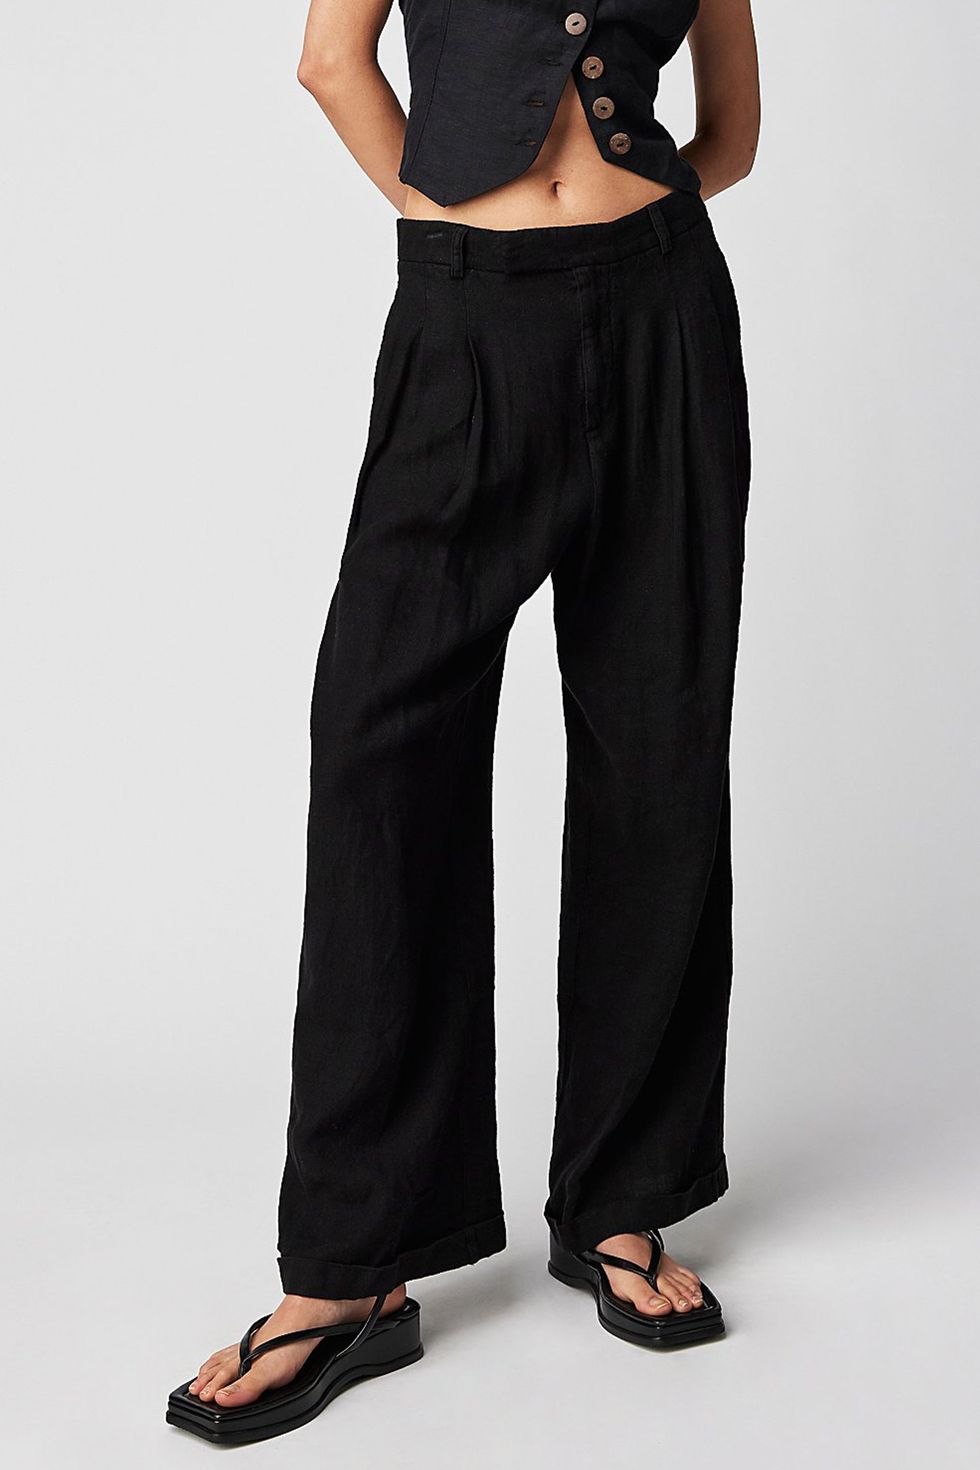 Free Country Women's Black Work Pants (X-large) in the Pants department at